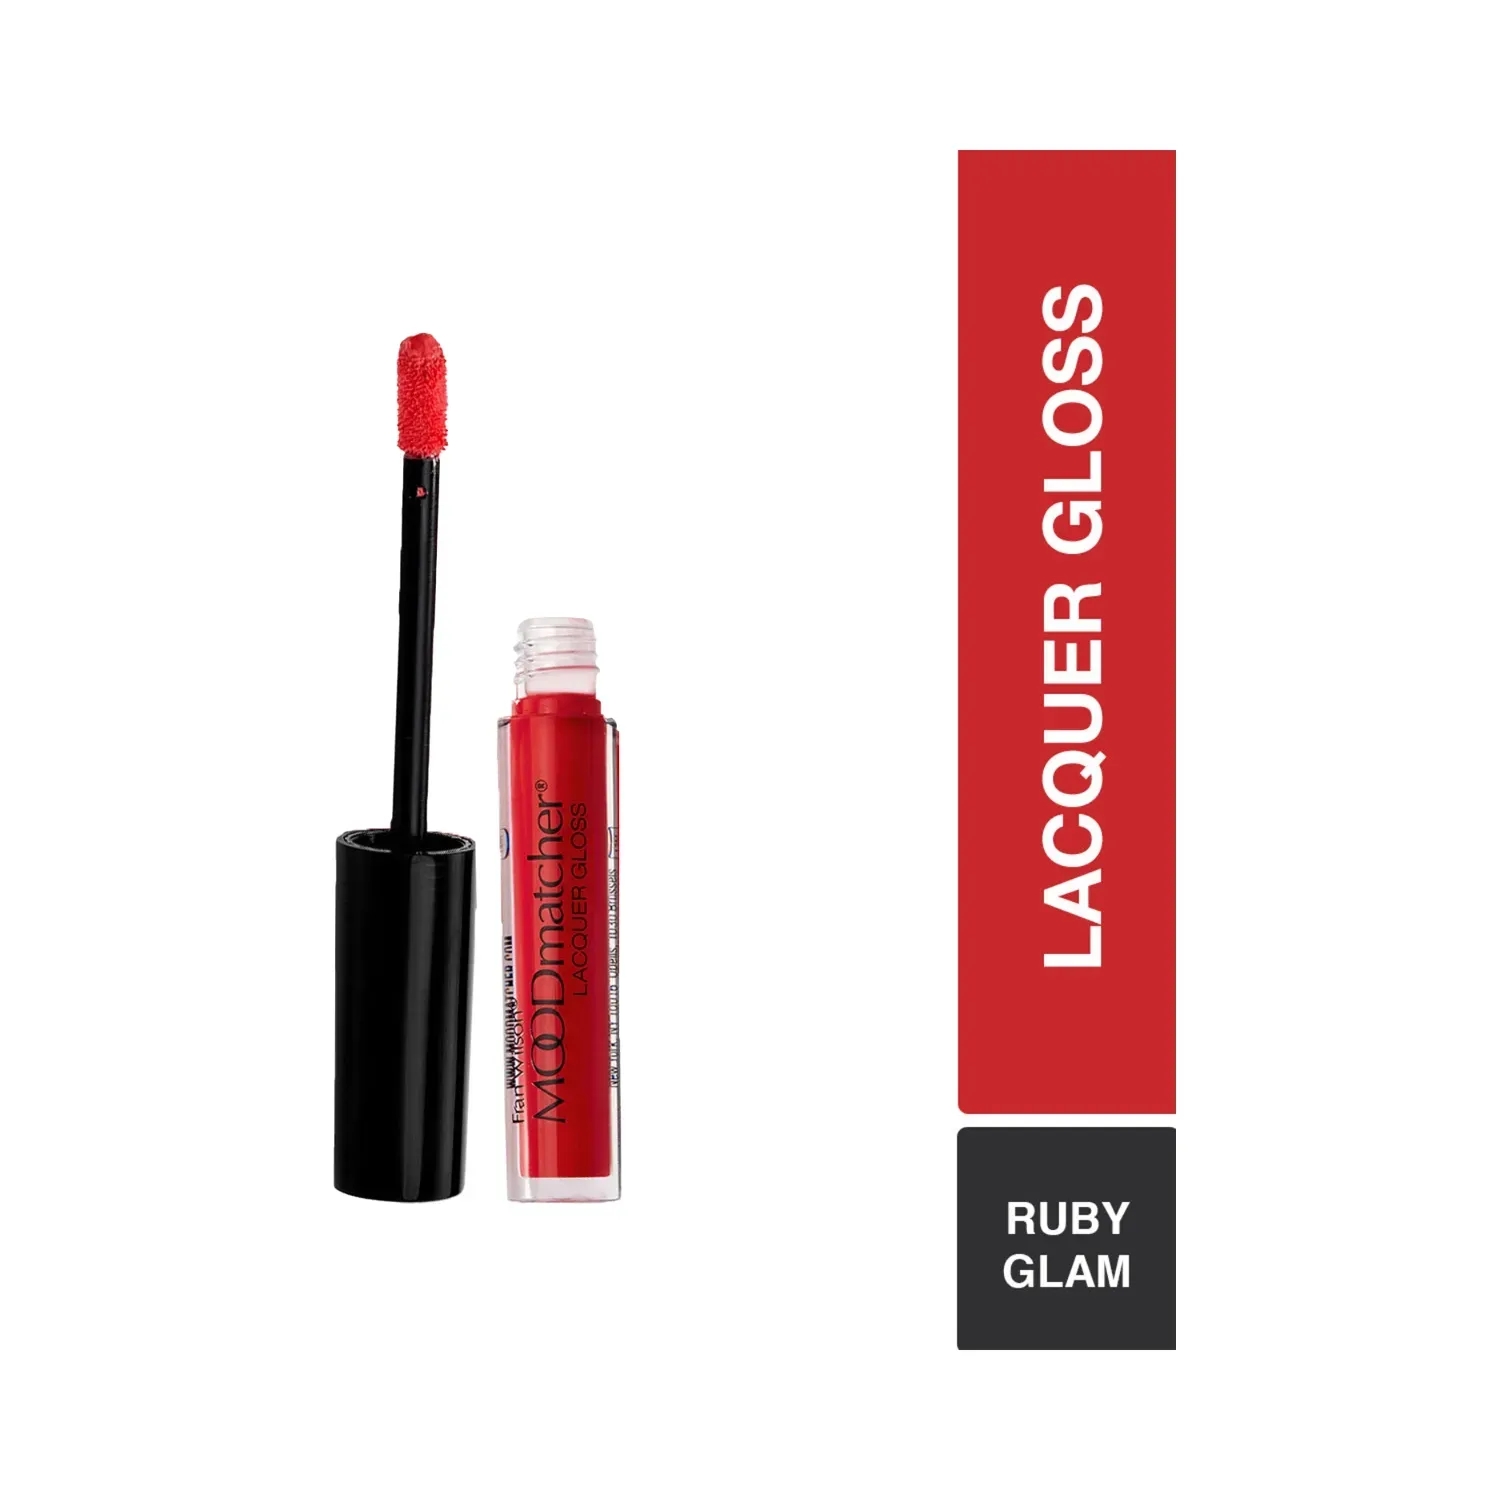 Fran Wilson Moodmatcher | Fran Wilson Moodmatcher Lacquer Lip Gloss - Ruby Glam (2ml)